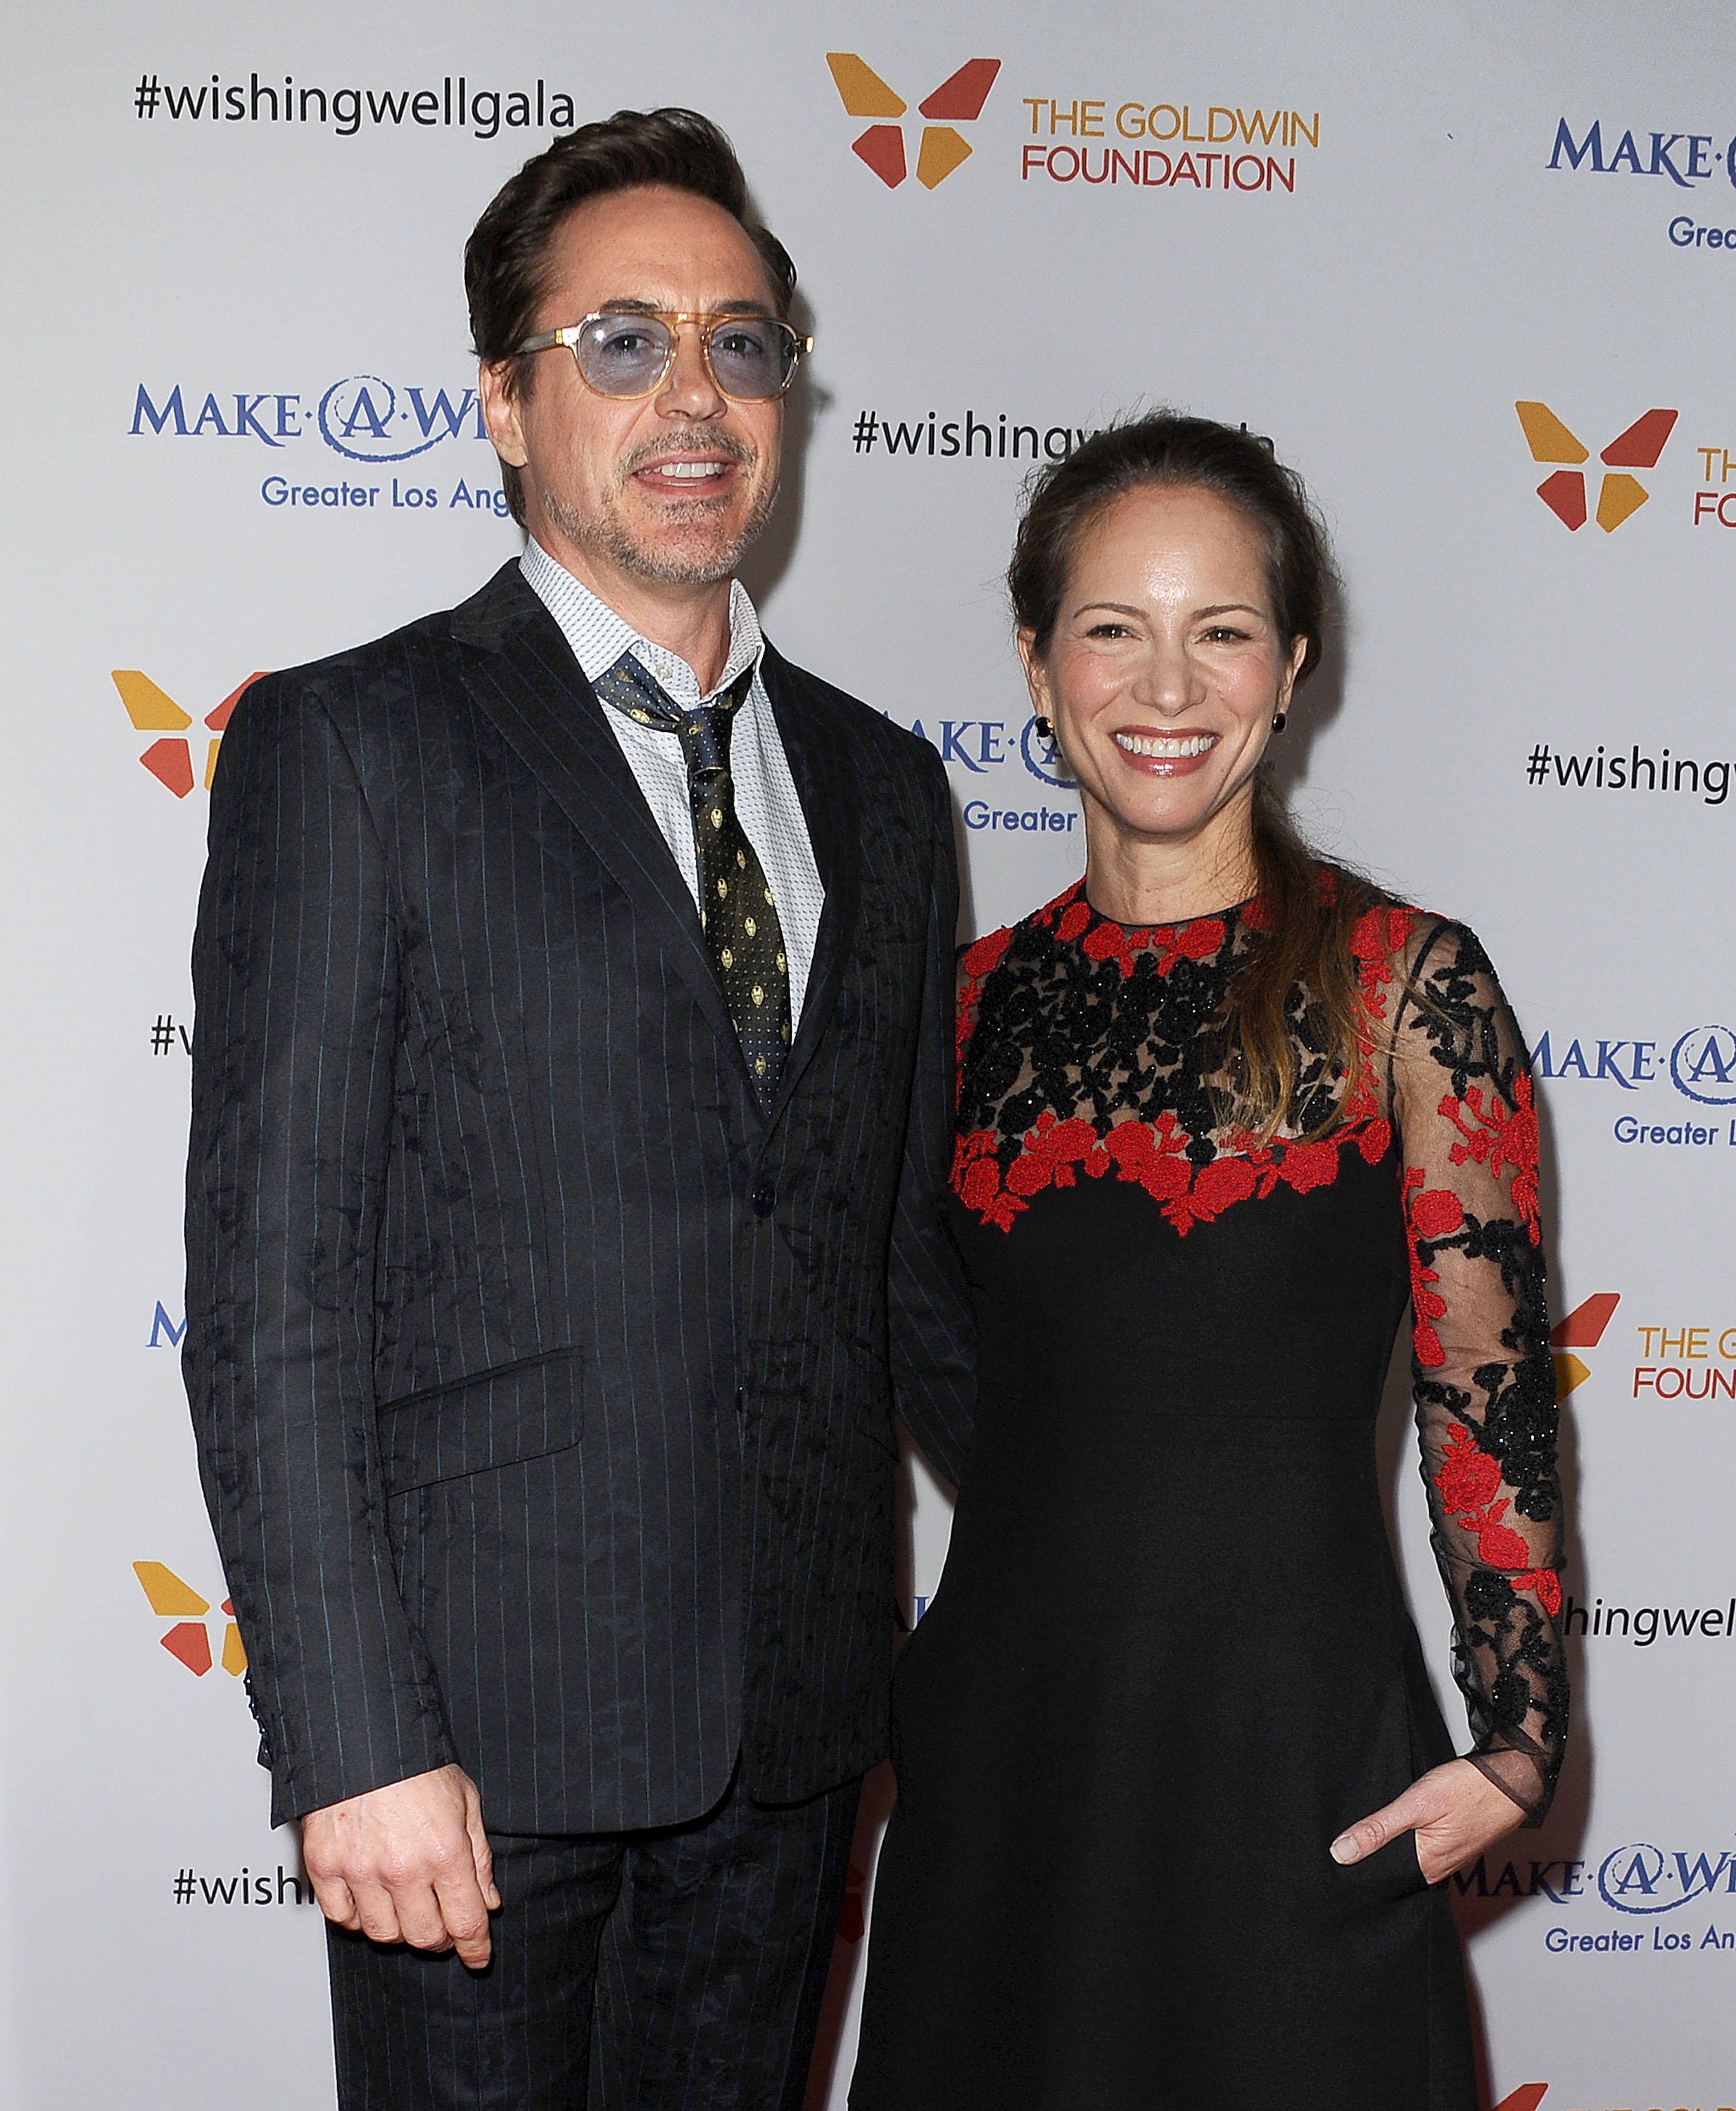 Robert Downey Jr. and his wife Susan in California in 2016 | Source: Getty Images